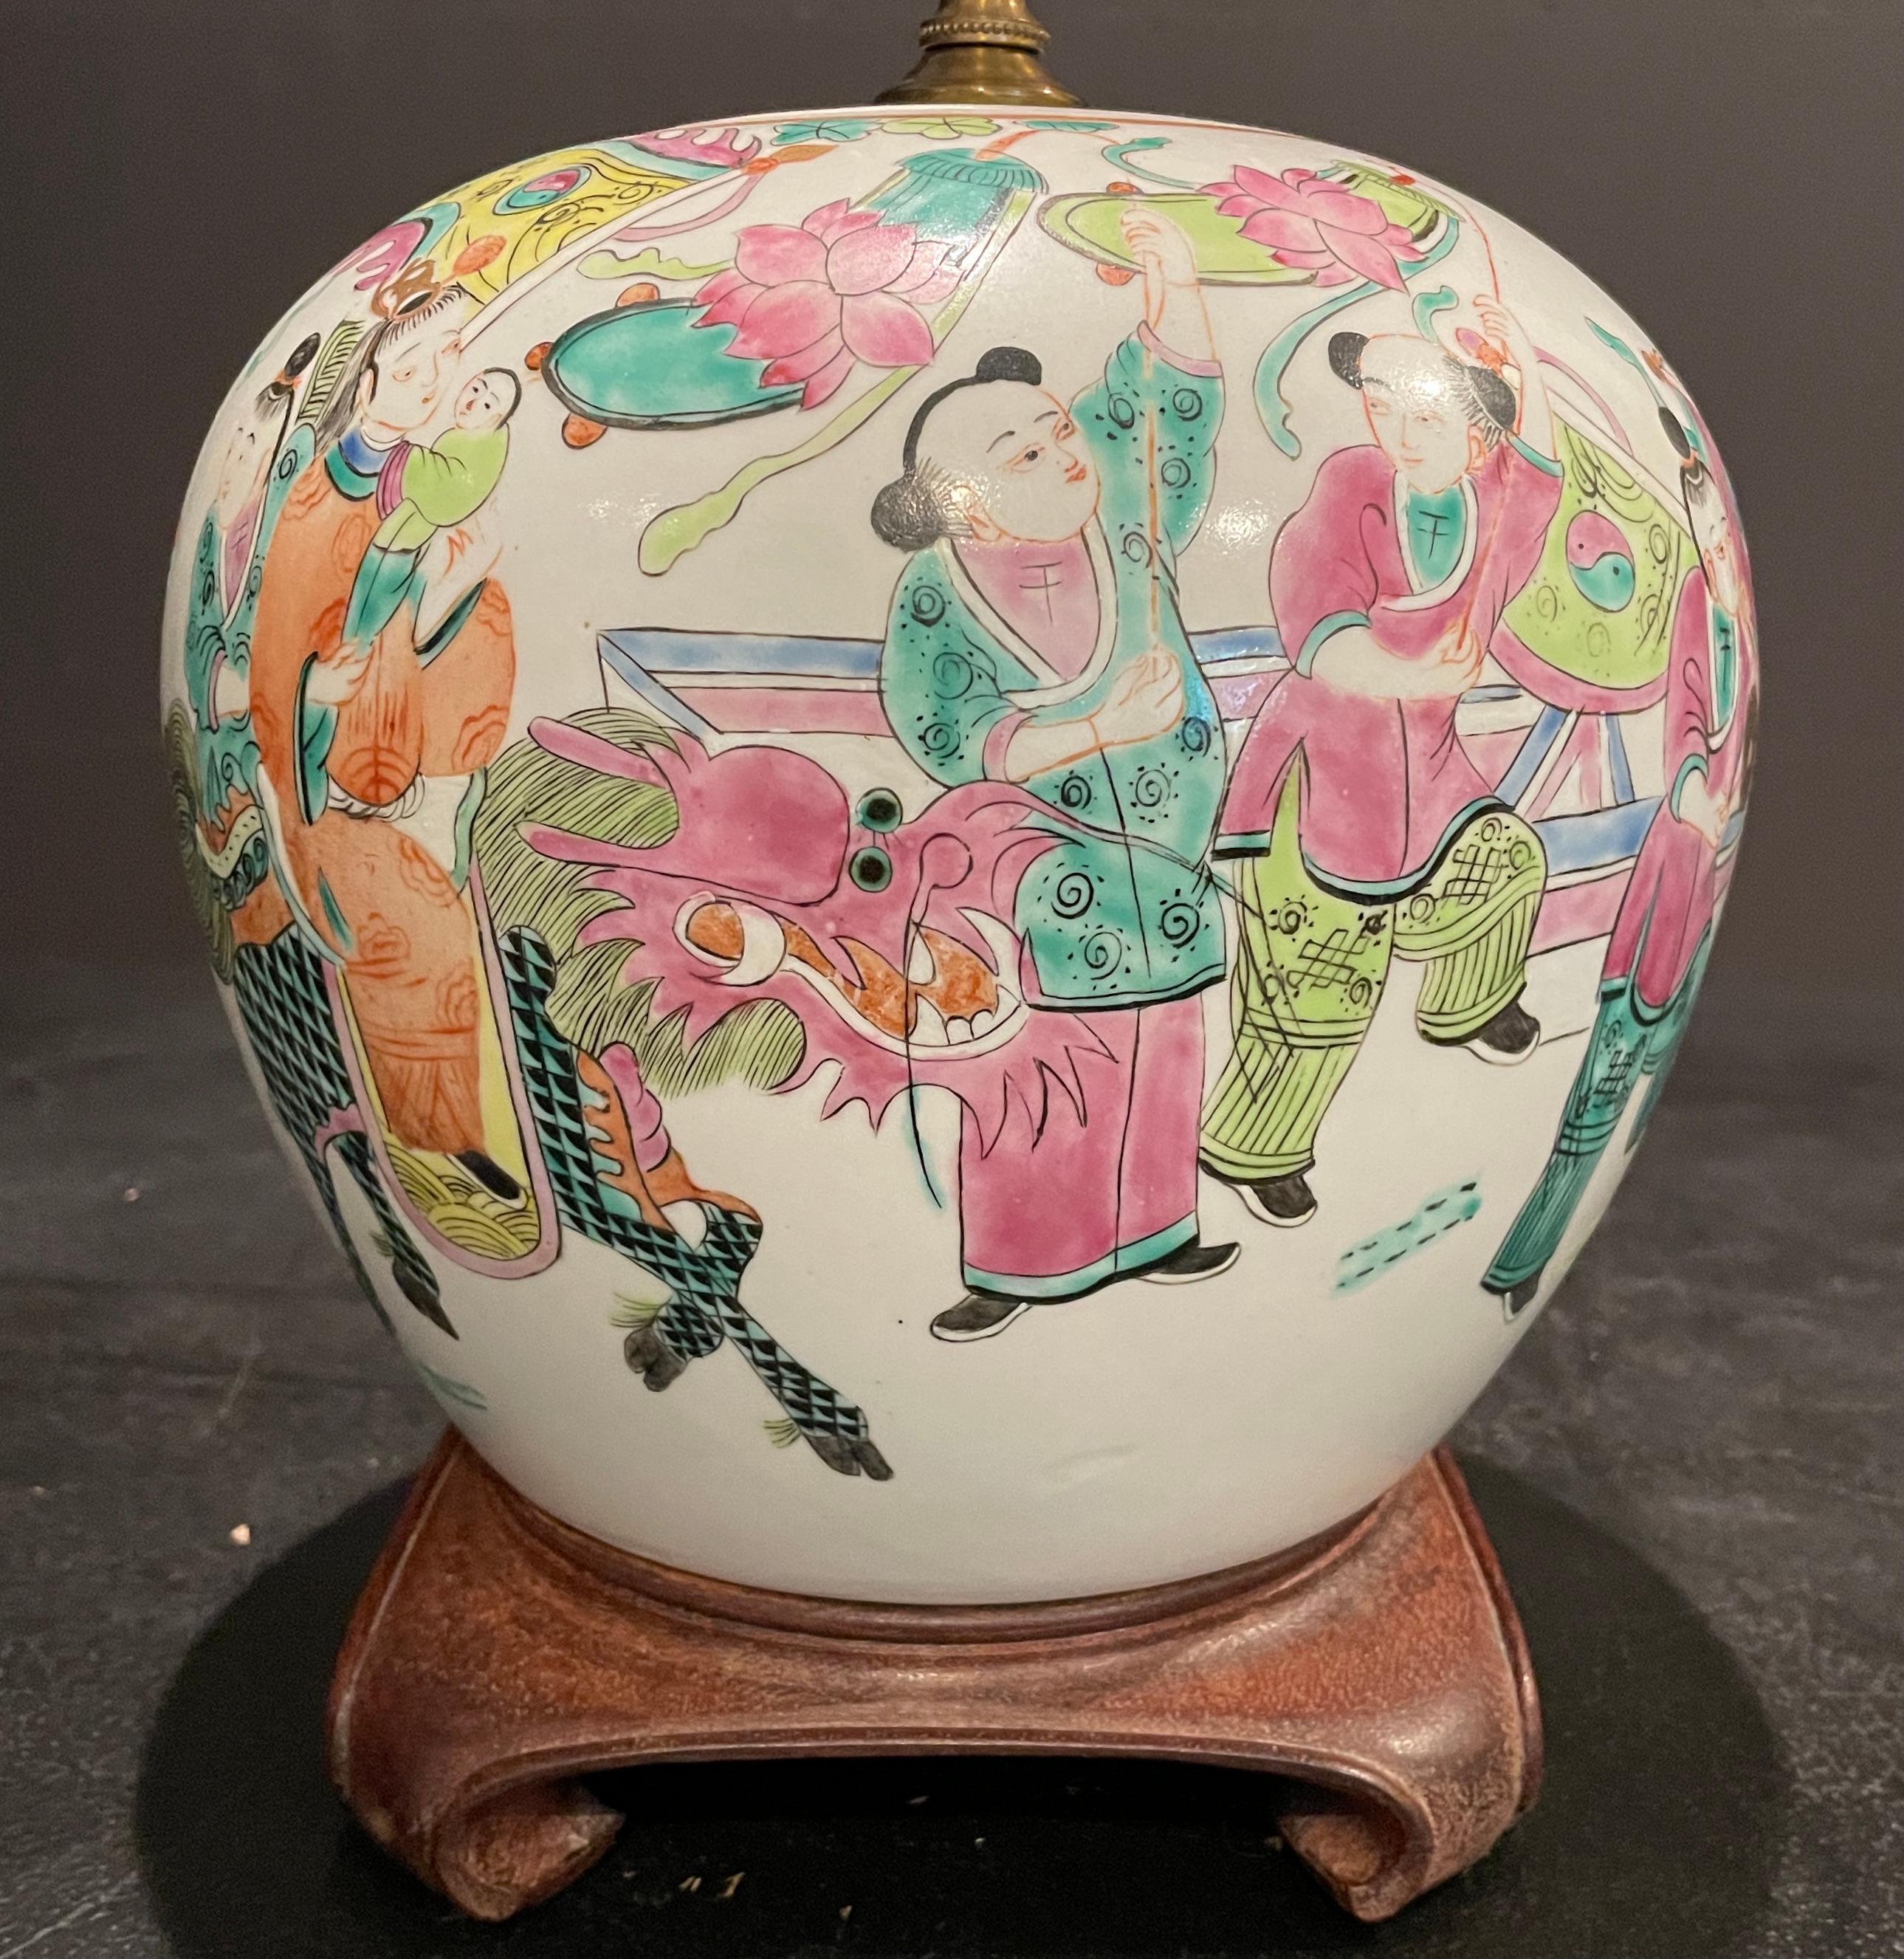 Antique Chinese famille rose porcelain ginger jar mounted as a lamp. Porcelain cover and square wood base. Colorful figures with children and dragon. Orange, pines and greens.
Orange bats at back of vase.
9.5